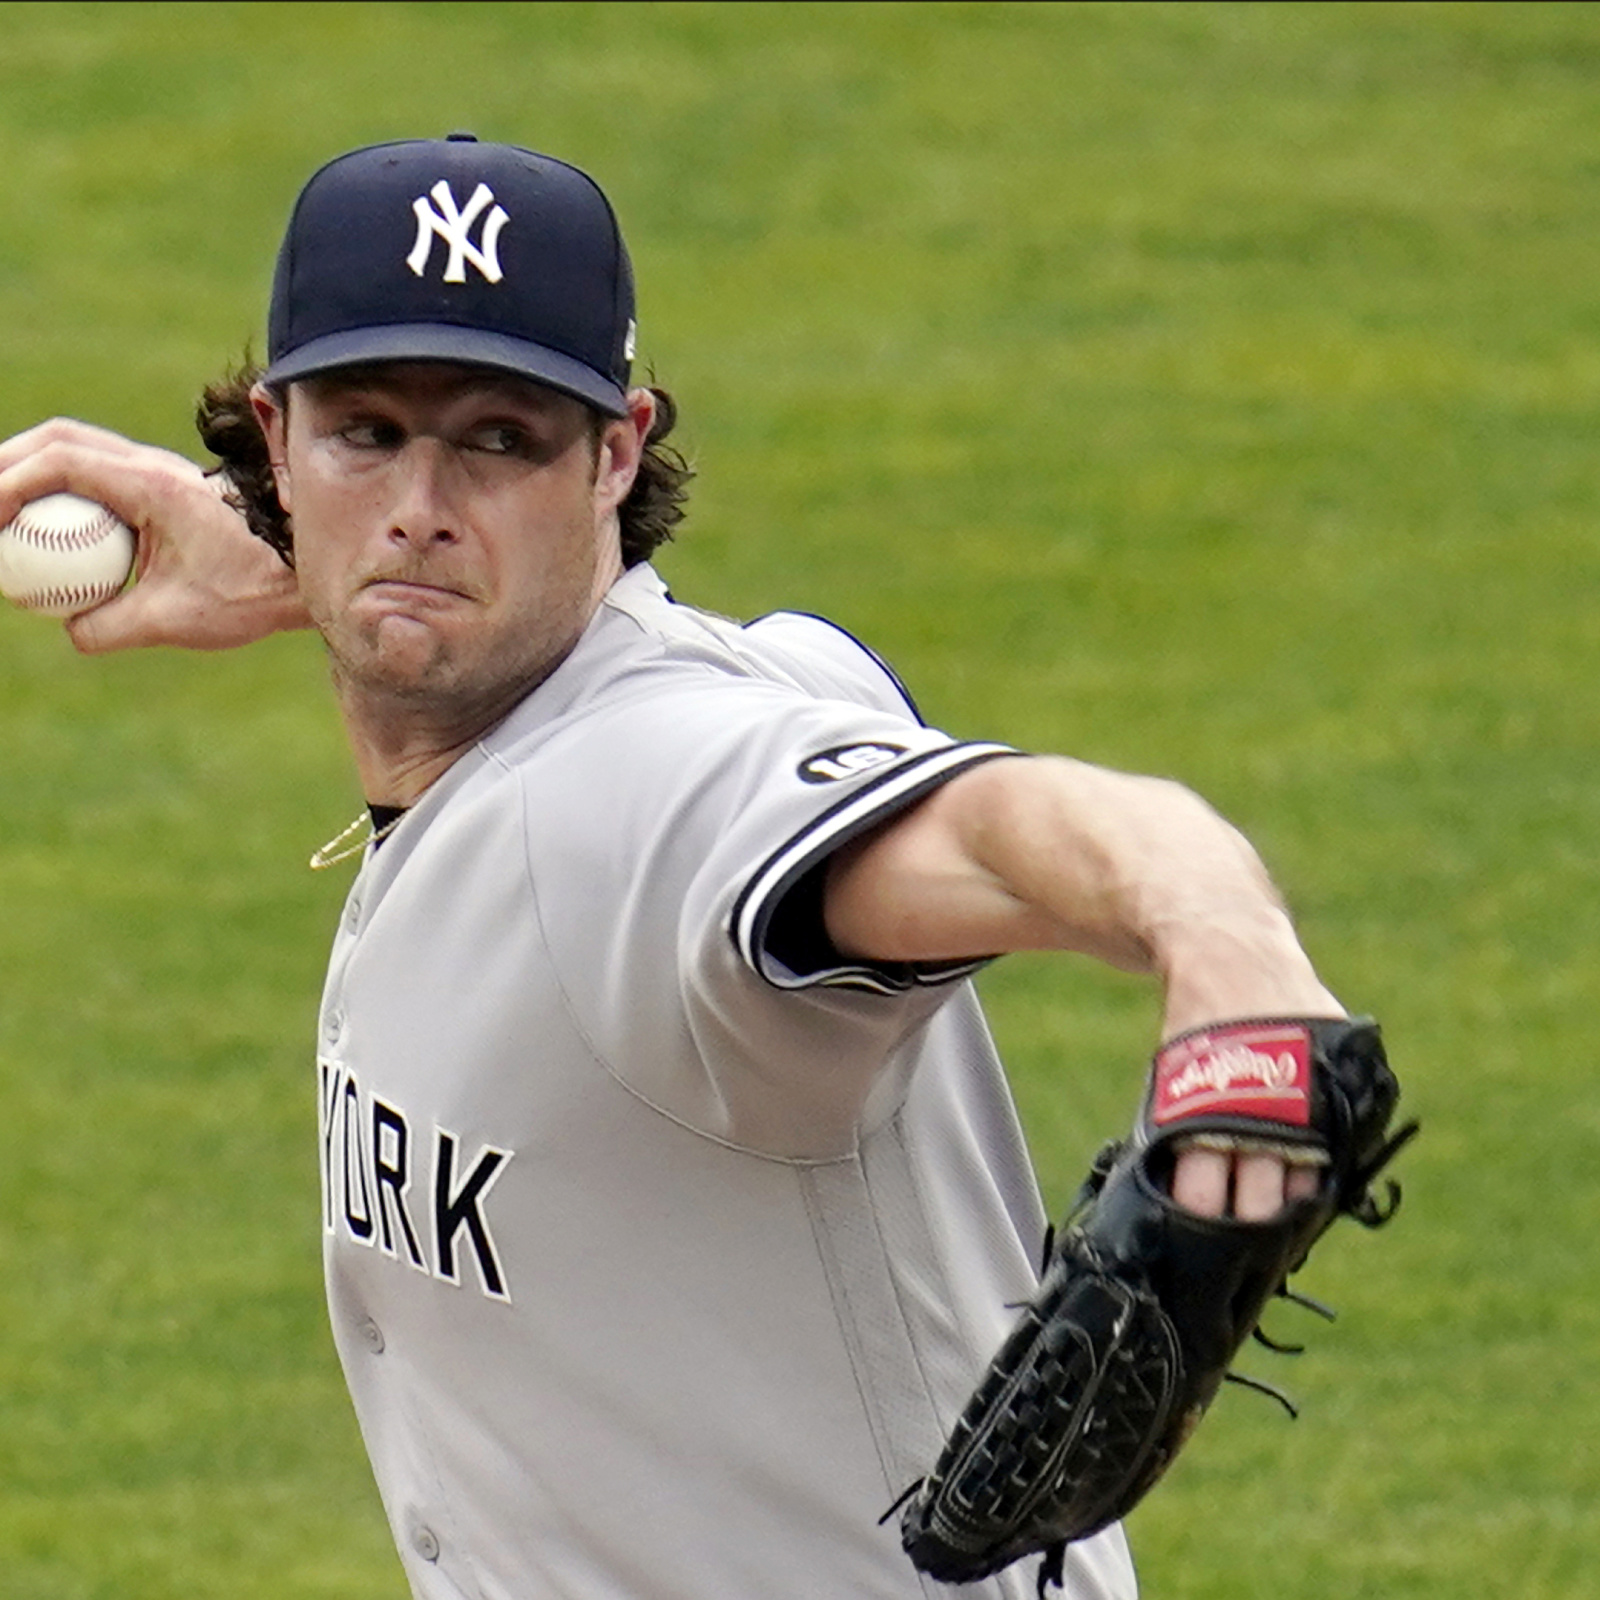 MLB pitchers, including Yankees' Gerrit Cole, face suspension if